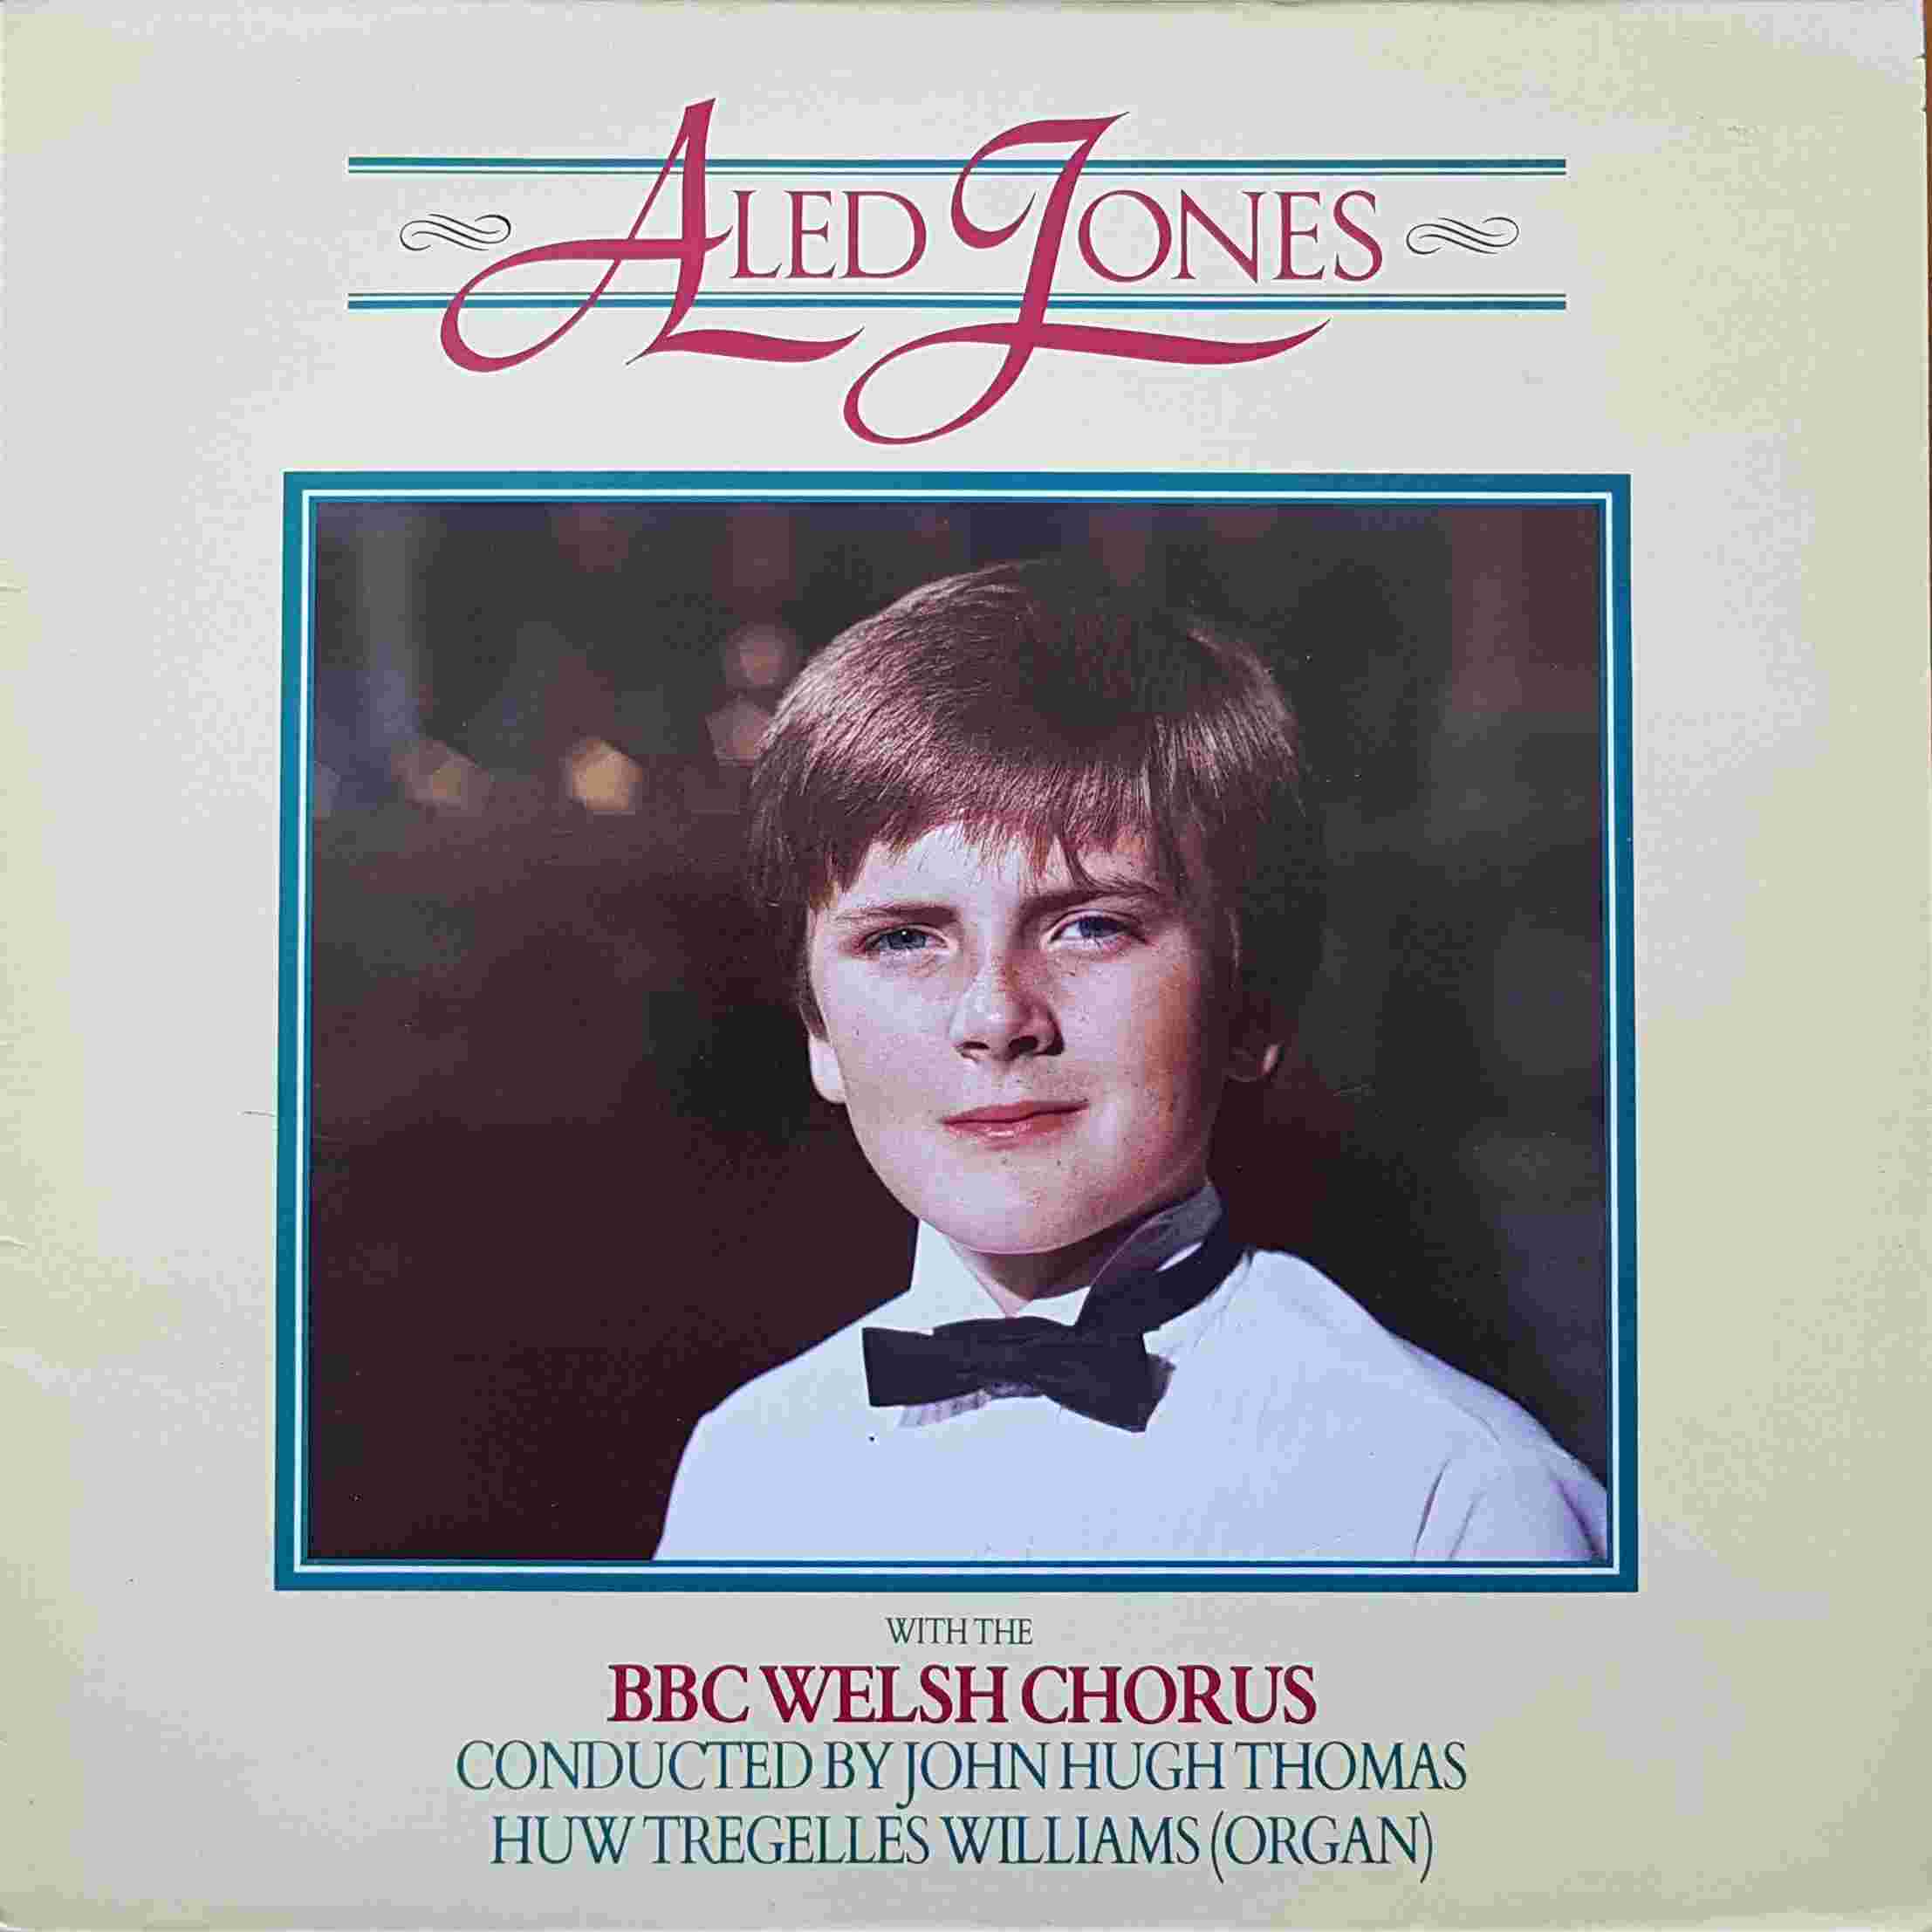 Picture of AJ 1 Aled Jones by artist Aled Jones from the BBC albums - Records and Tapes library